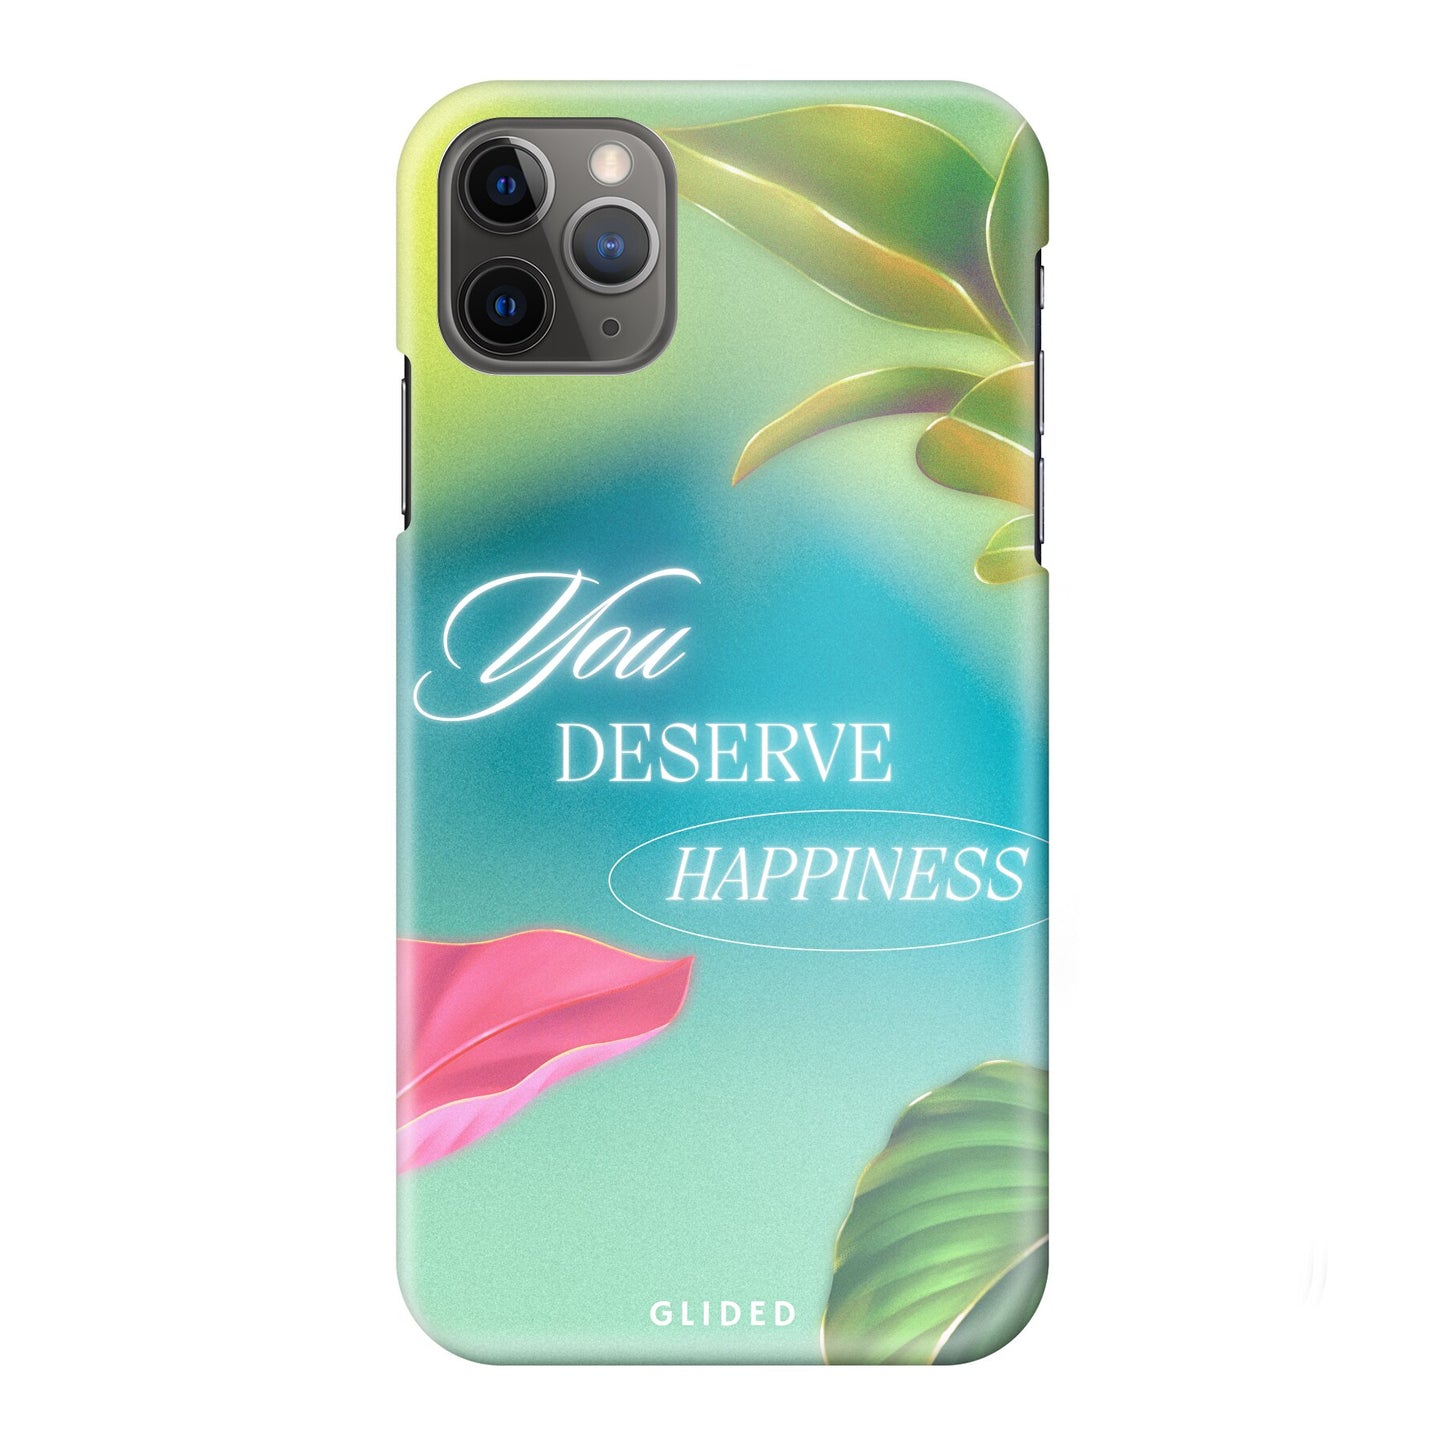 Happiness - iPhone 11 Pro Max - Hard Case